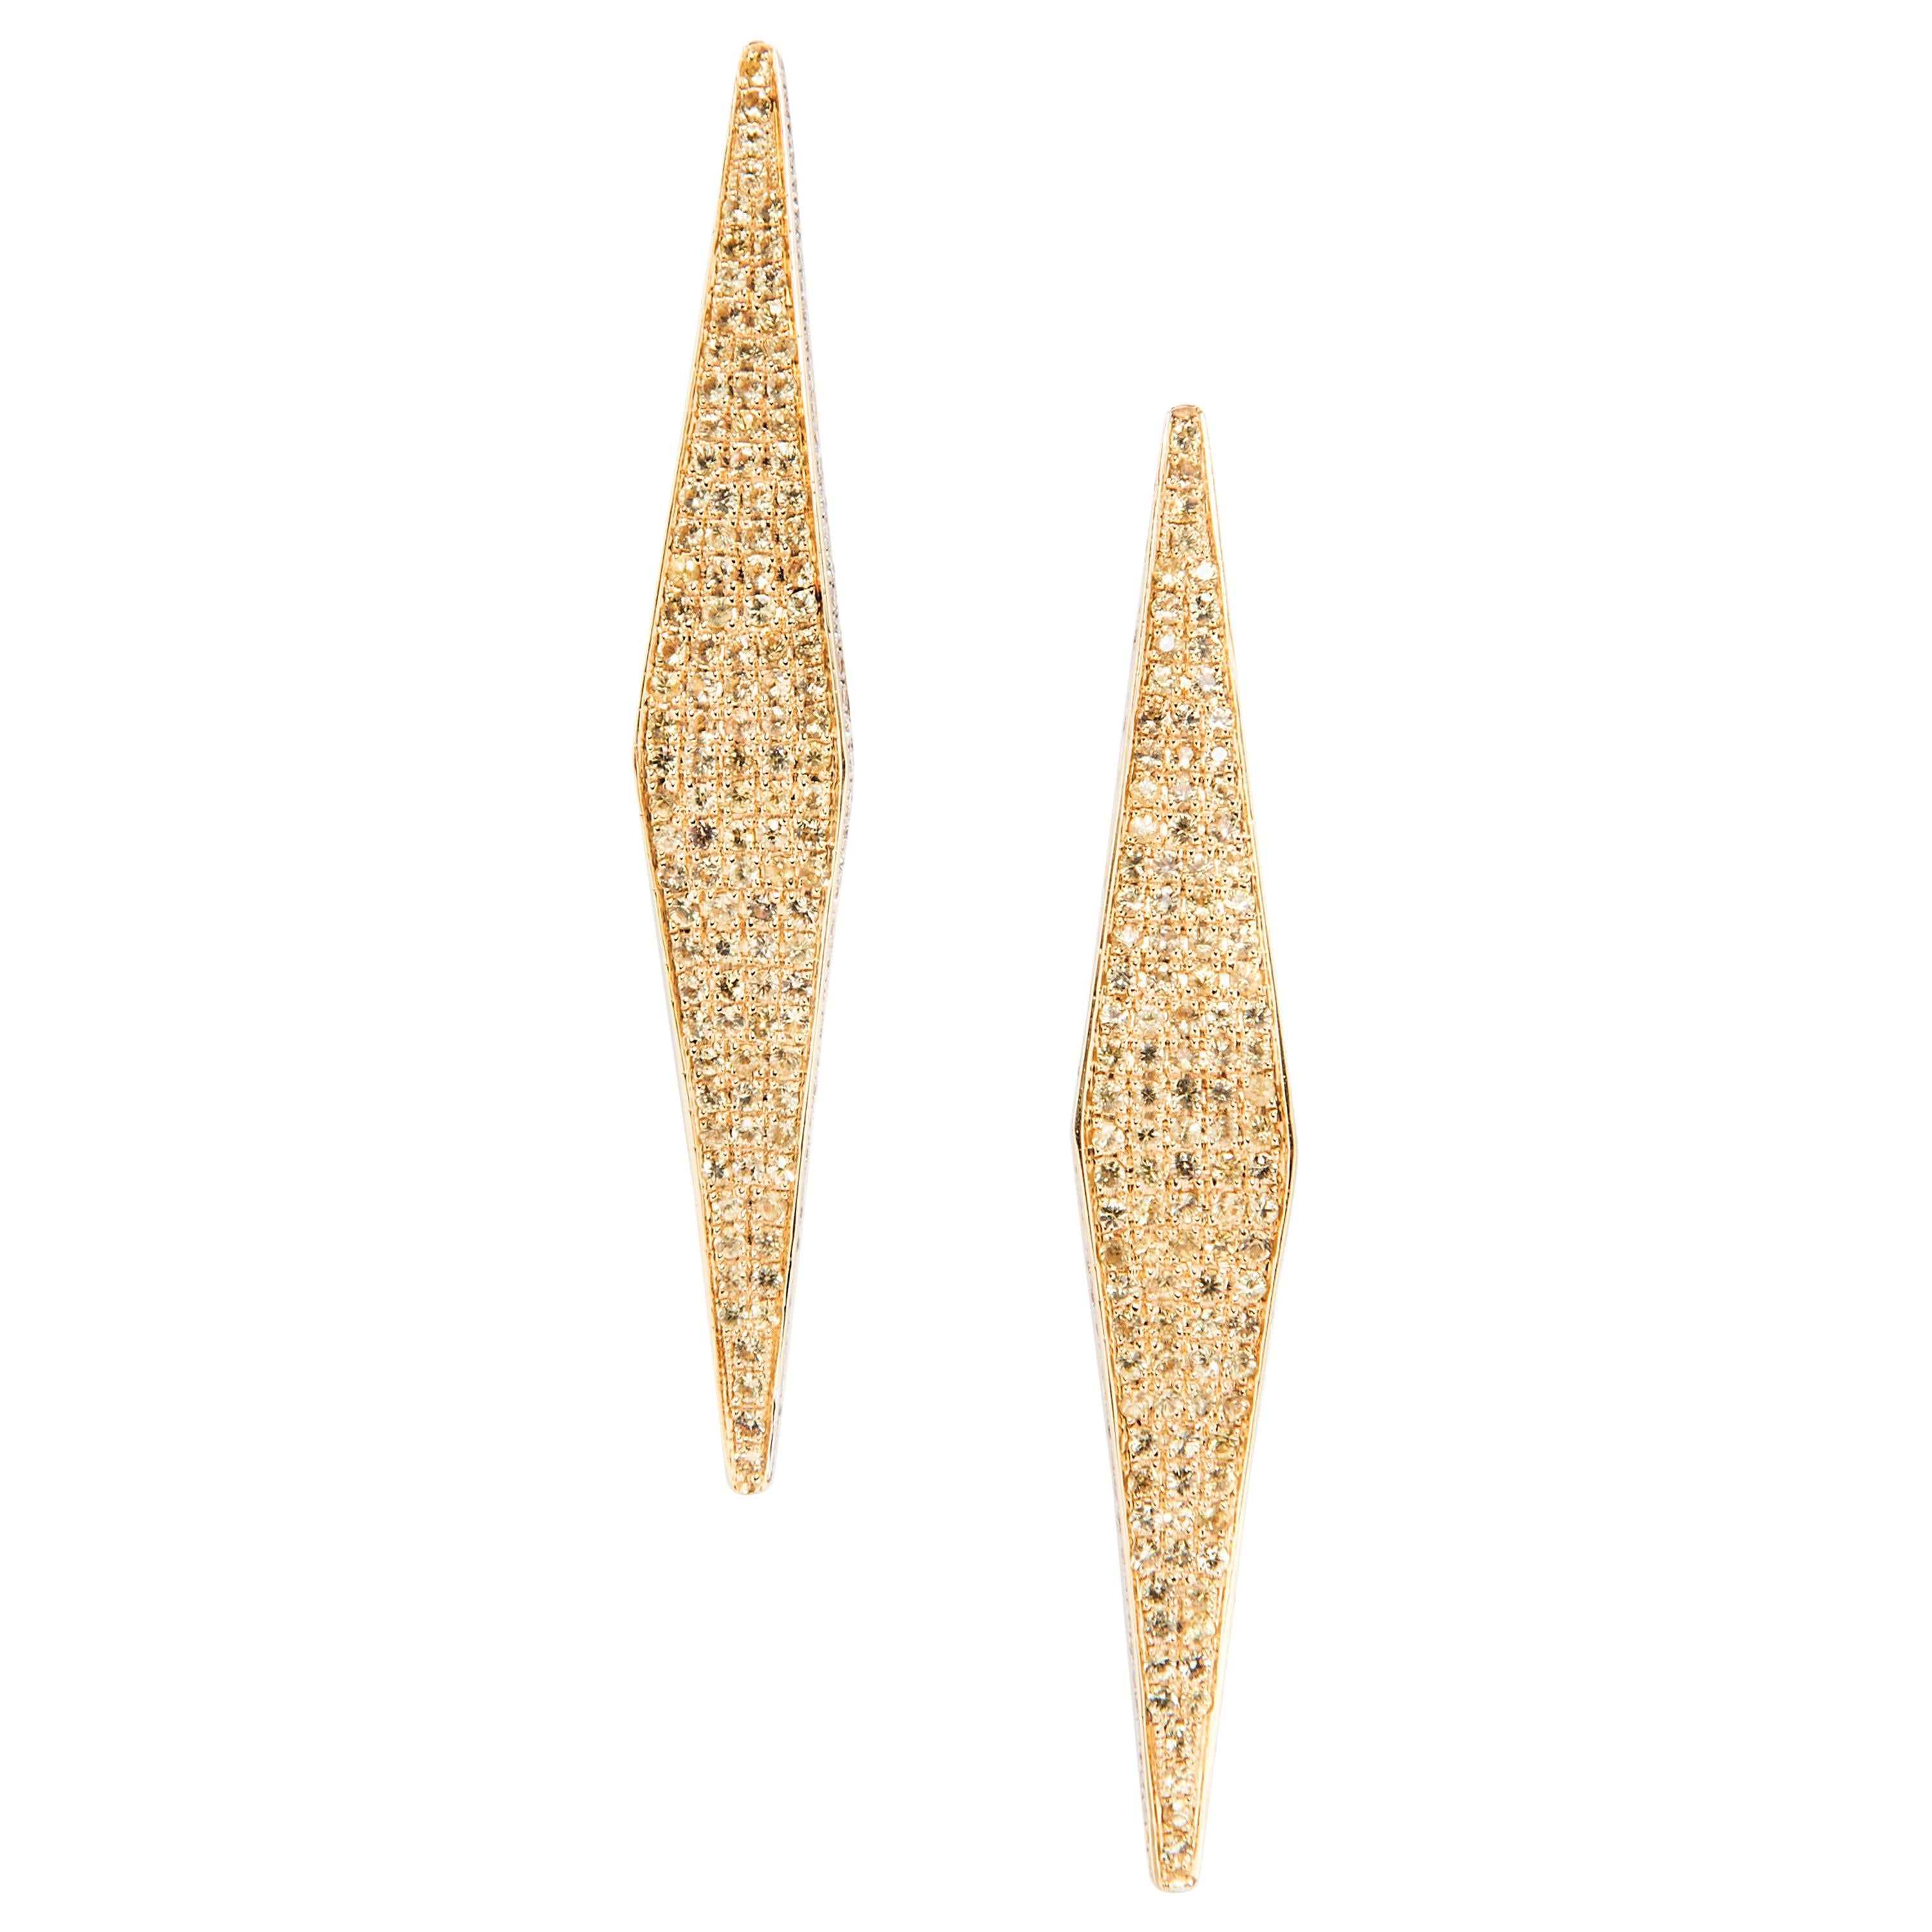 Ralph Masri Modernist Pave Diamond and Yellow Sapphire Earrings For Sale